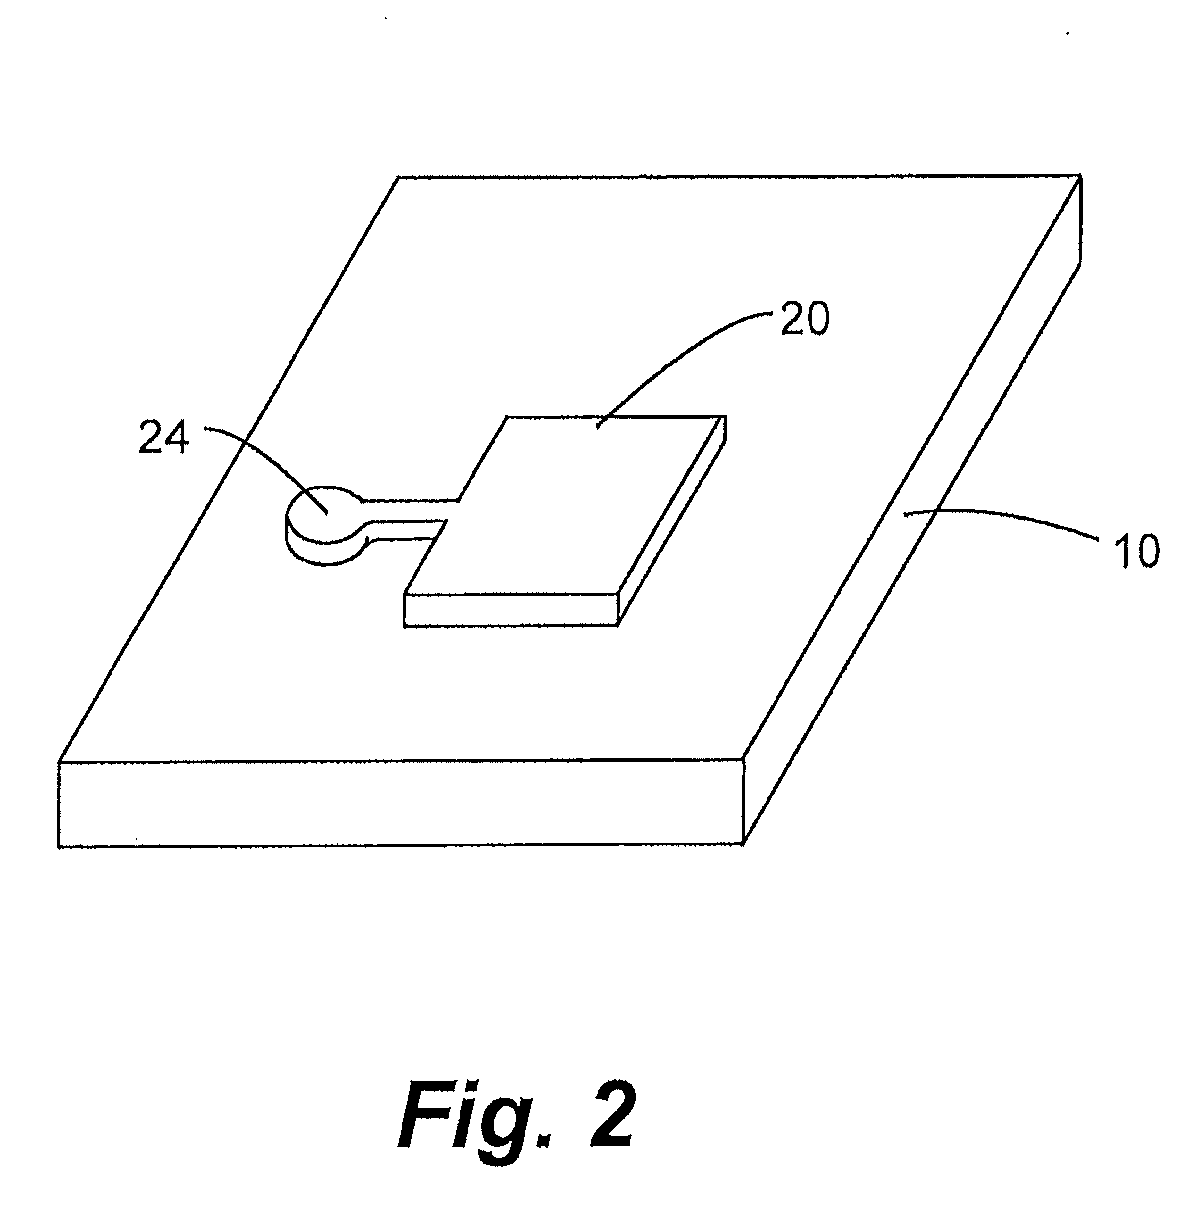 Atomic layer deposition process for manufacture of battery electrodes, capacitors, resistors, and catalyzers